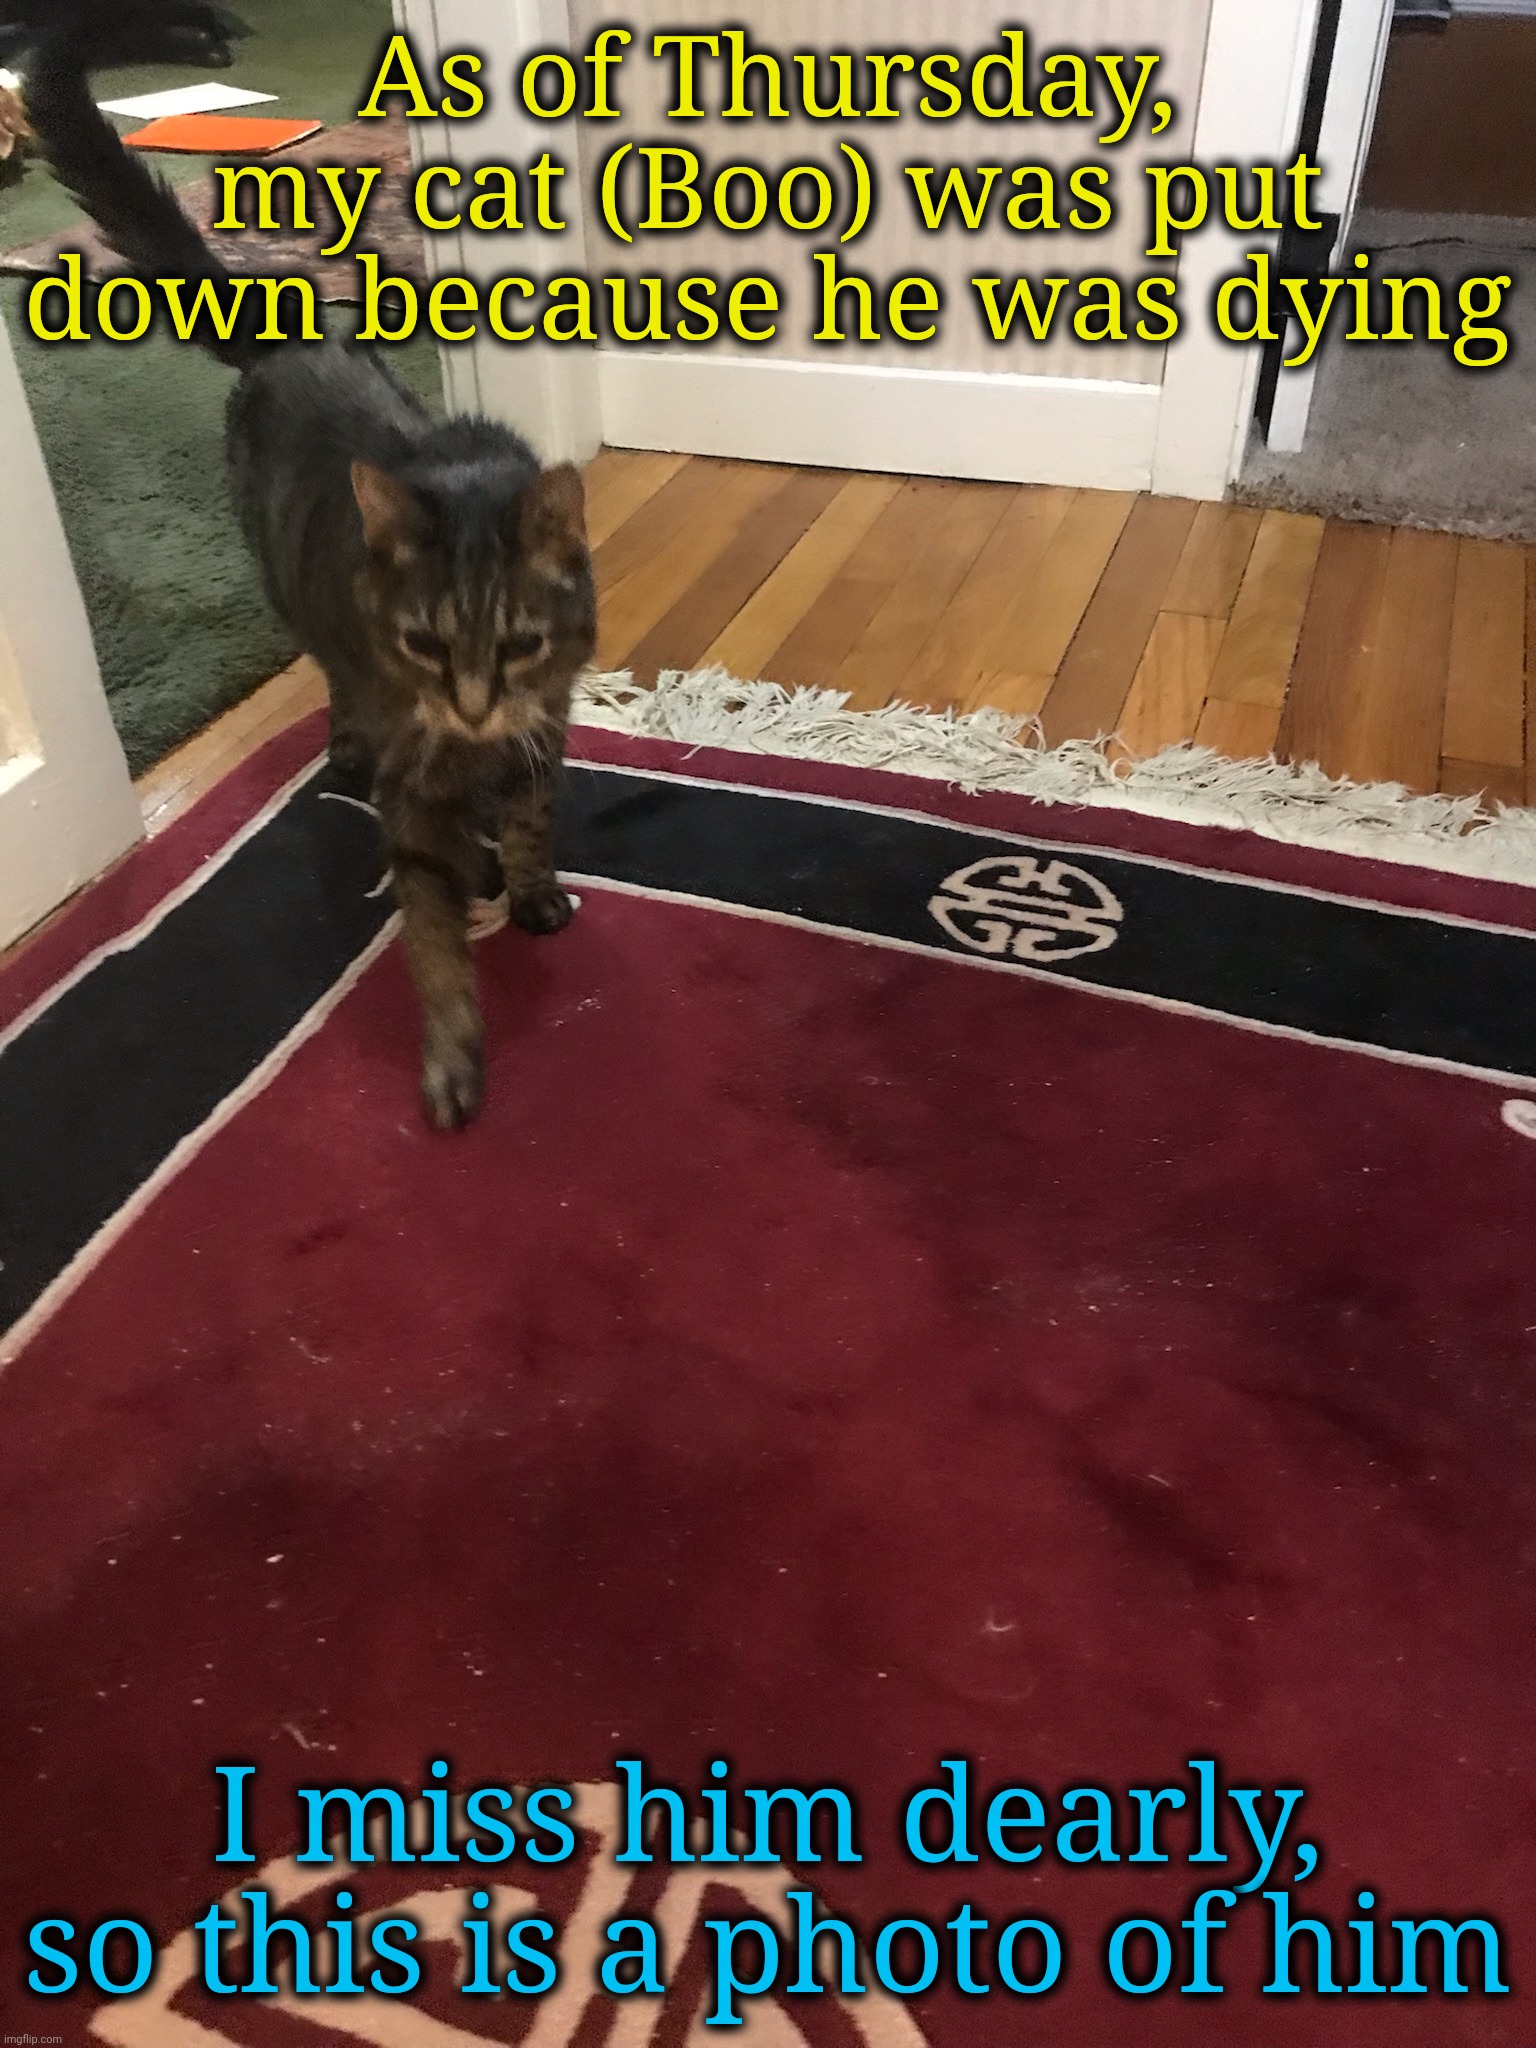 As of Thursday, my cat (Boo) was put down because he was dying; I miss him dearly, so this is a photo of him | made w/ Imgflip meme maker